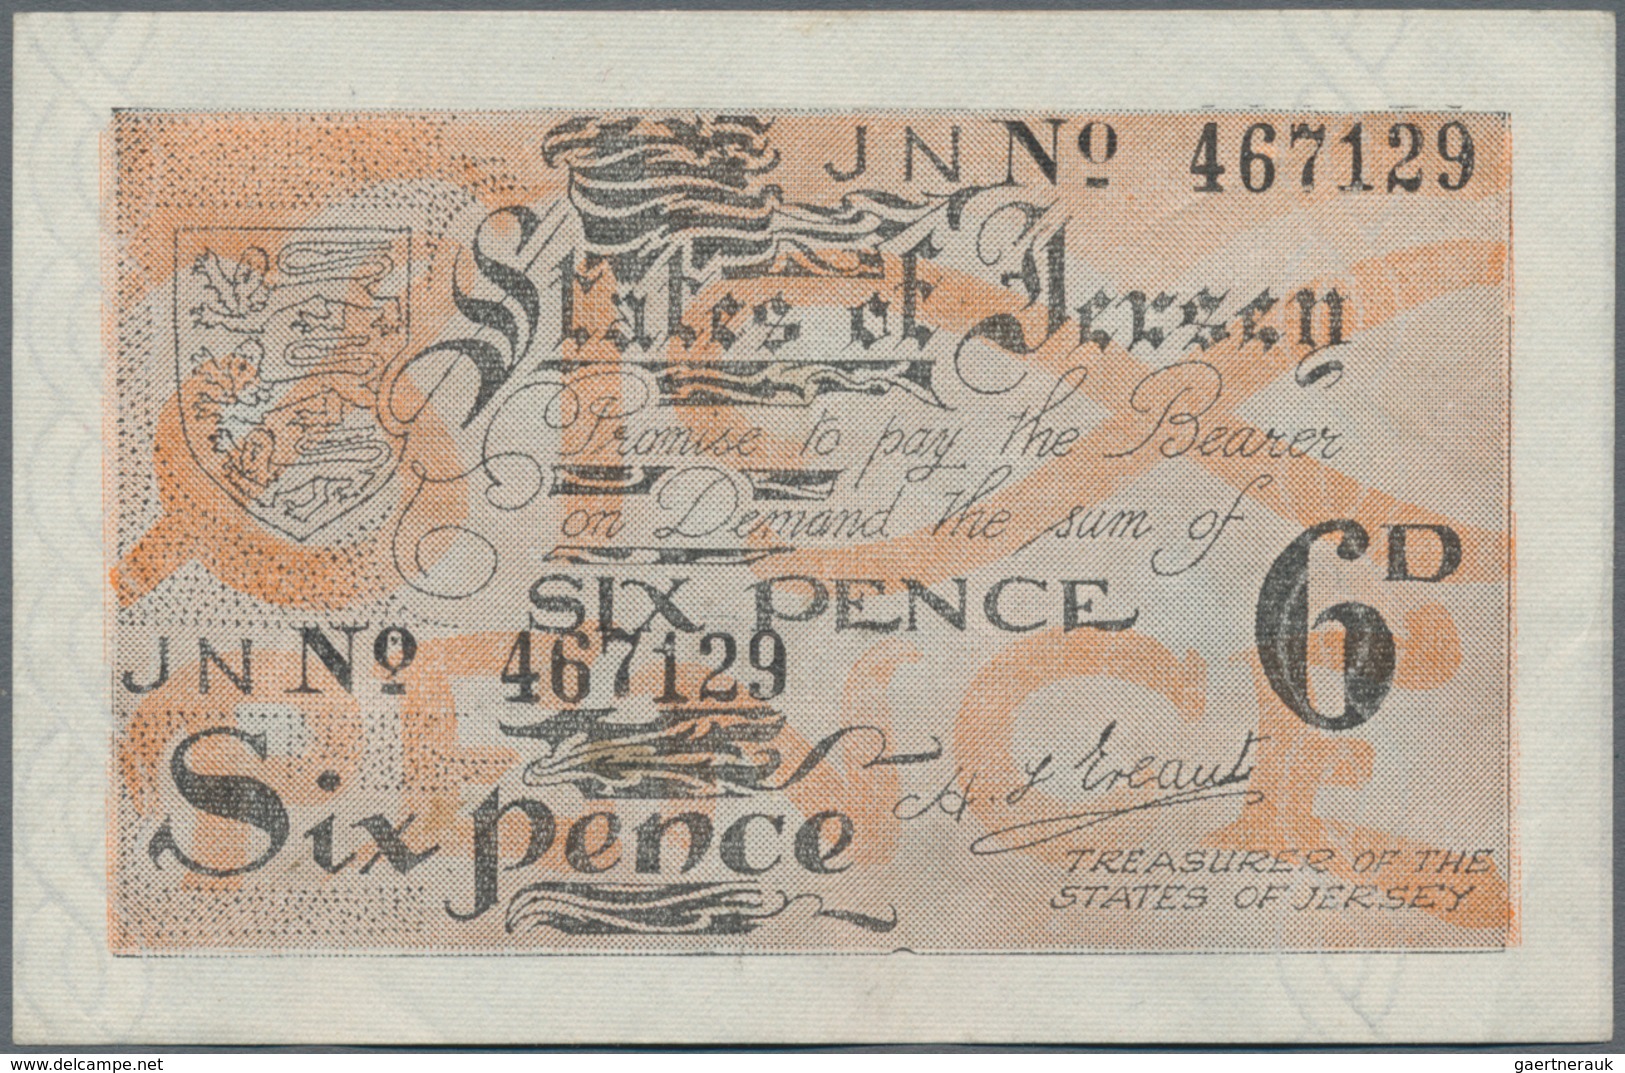 Europa: Very nice set with 34 banknotes Europe, comprising for example Andorra 1 Pesseta 1936 P.1 (G